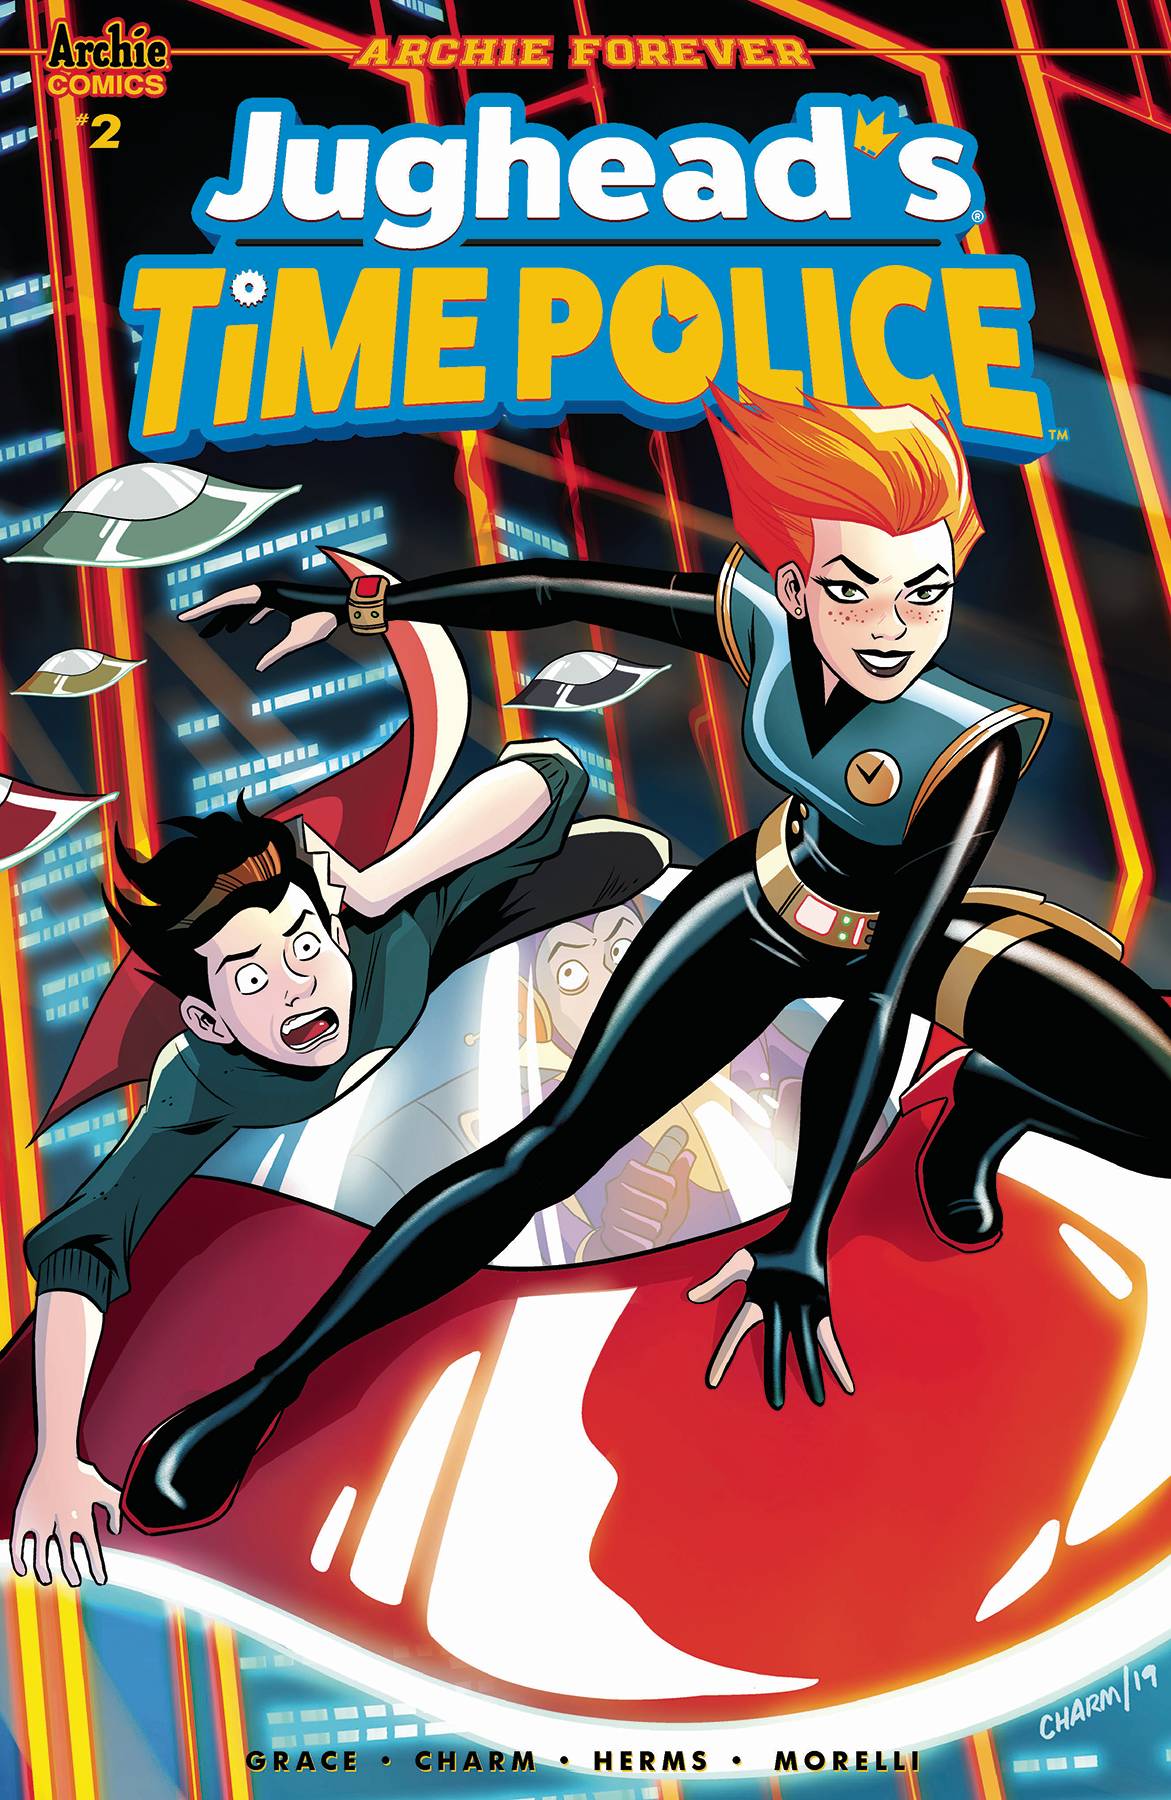 Jughead Time Police #2 Cover A Charm (Of 5)